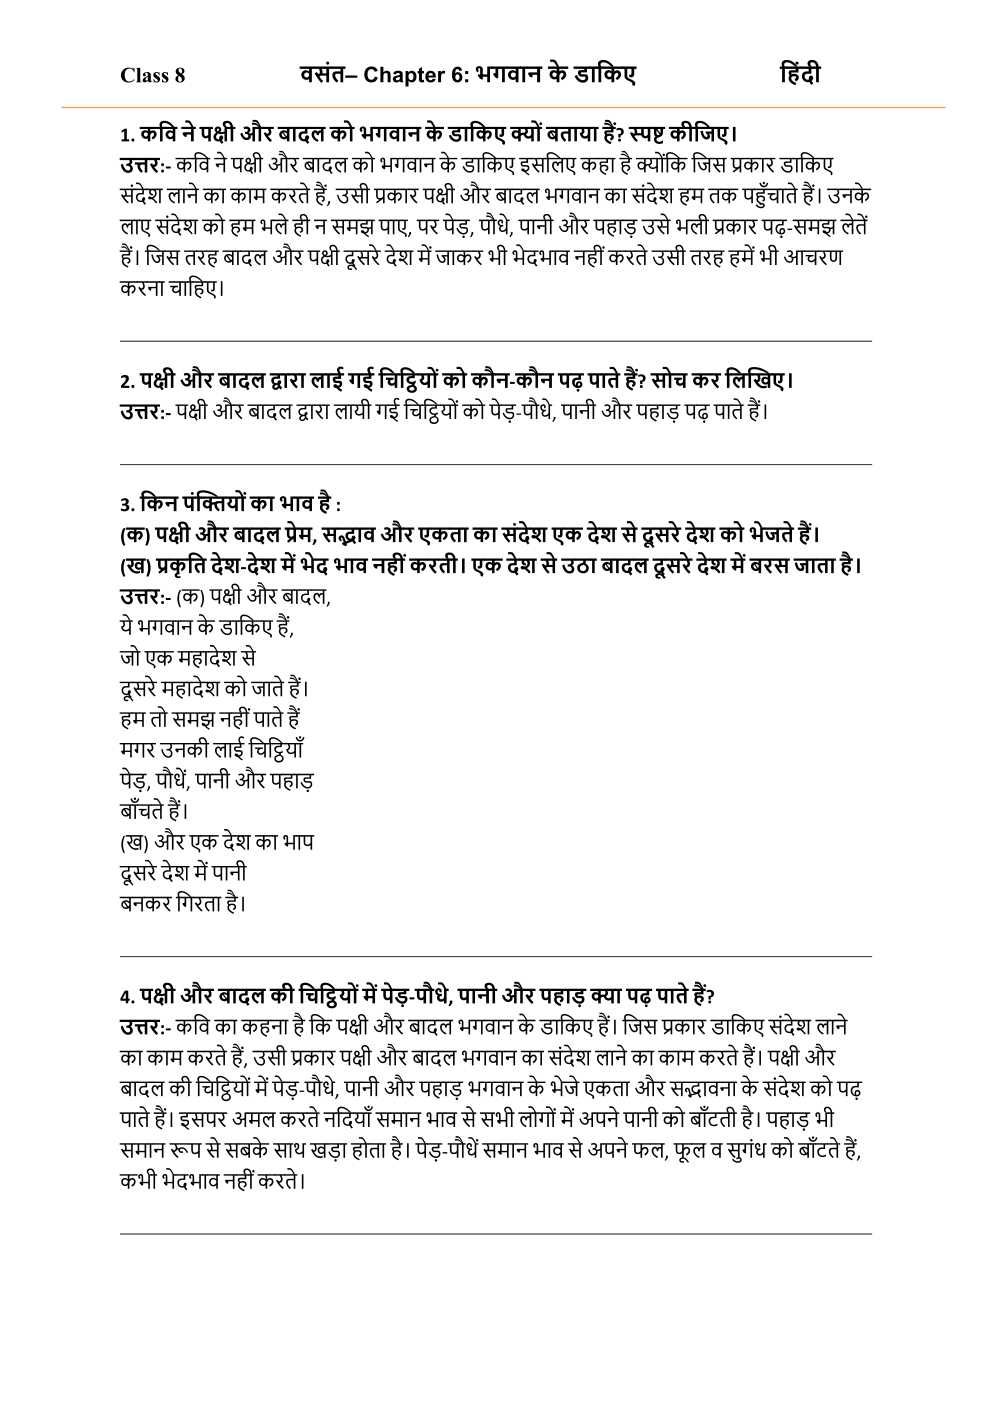 NCERT Solutions For Class 8 Hindi Vasant Chapter 6